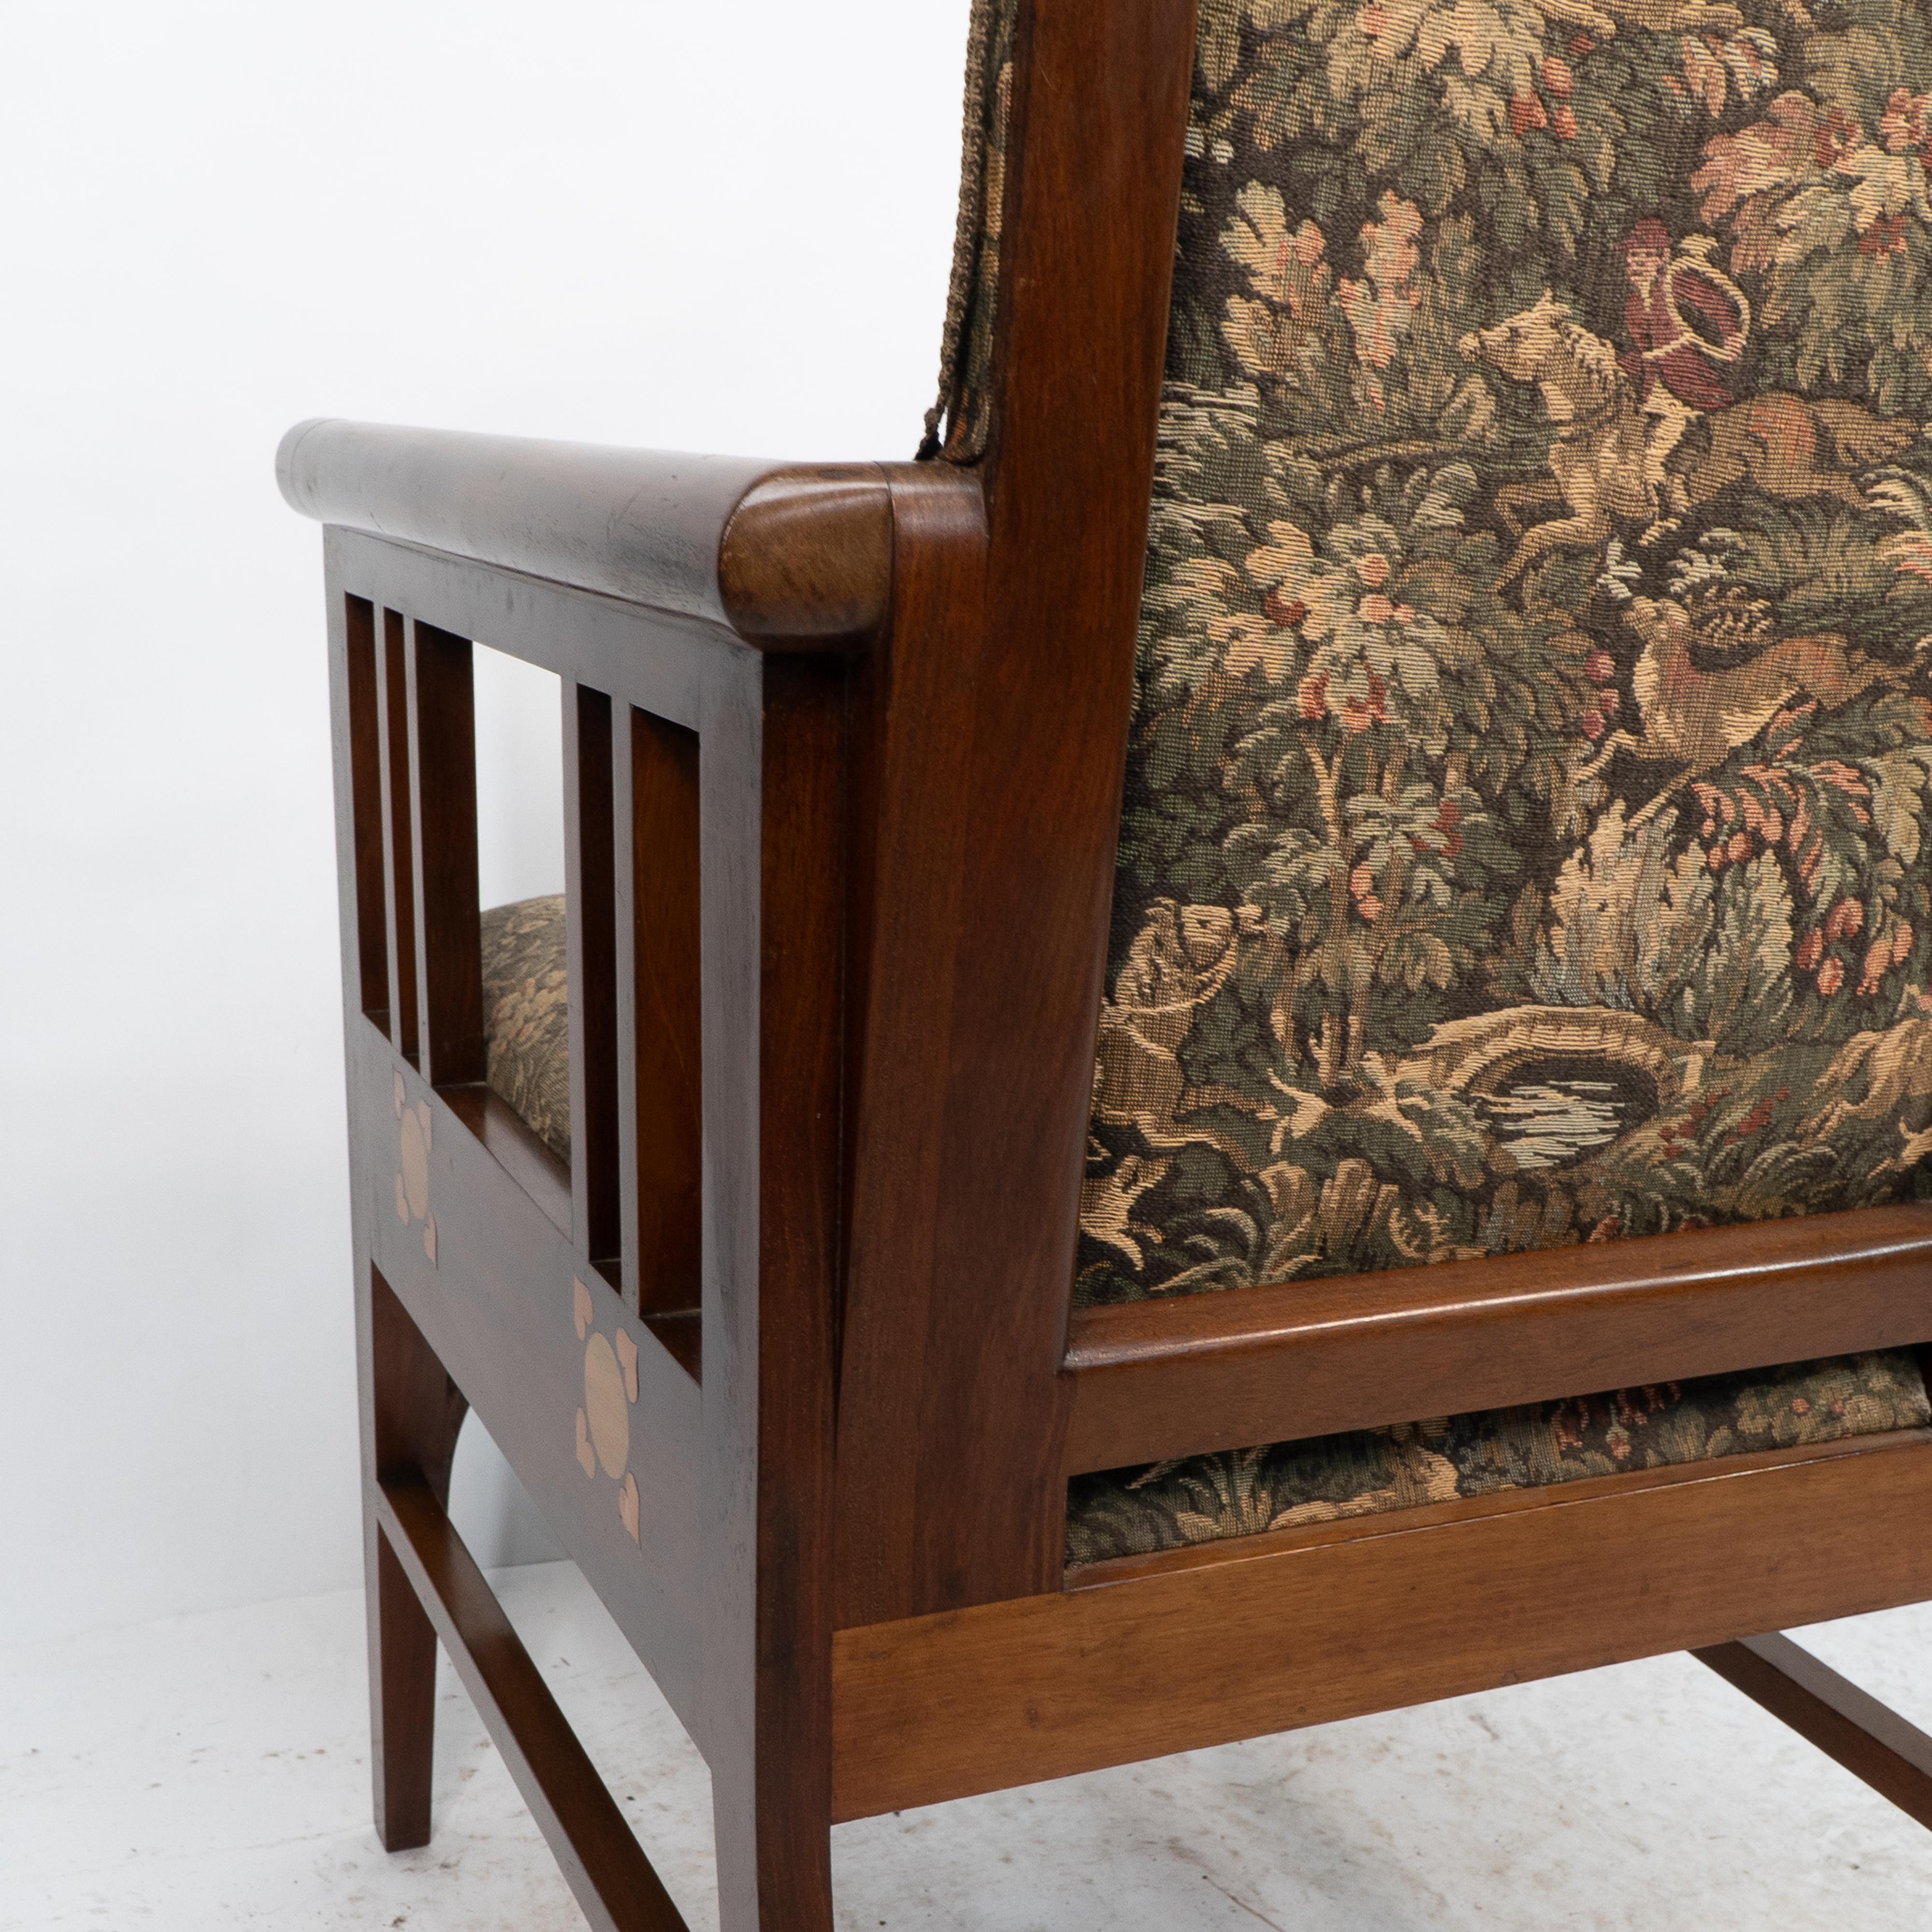 G M Ellwood for J S Henry. A Progressive New Art armchair with fruitwood inlays For Sale 12